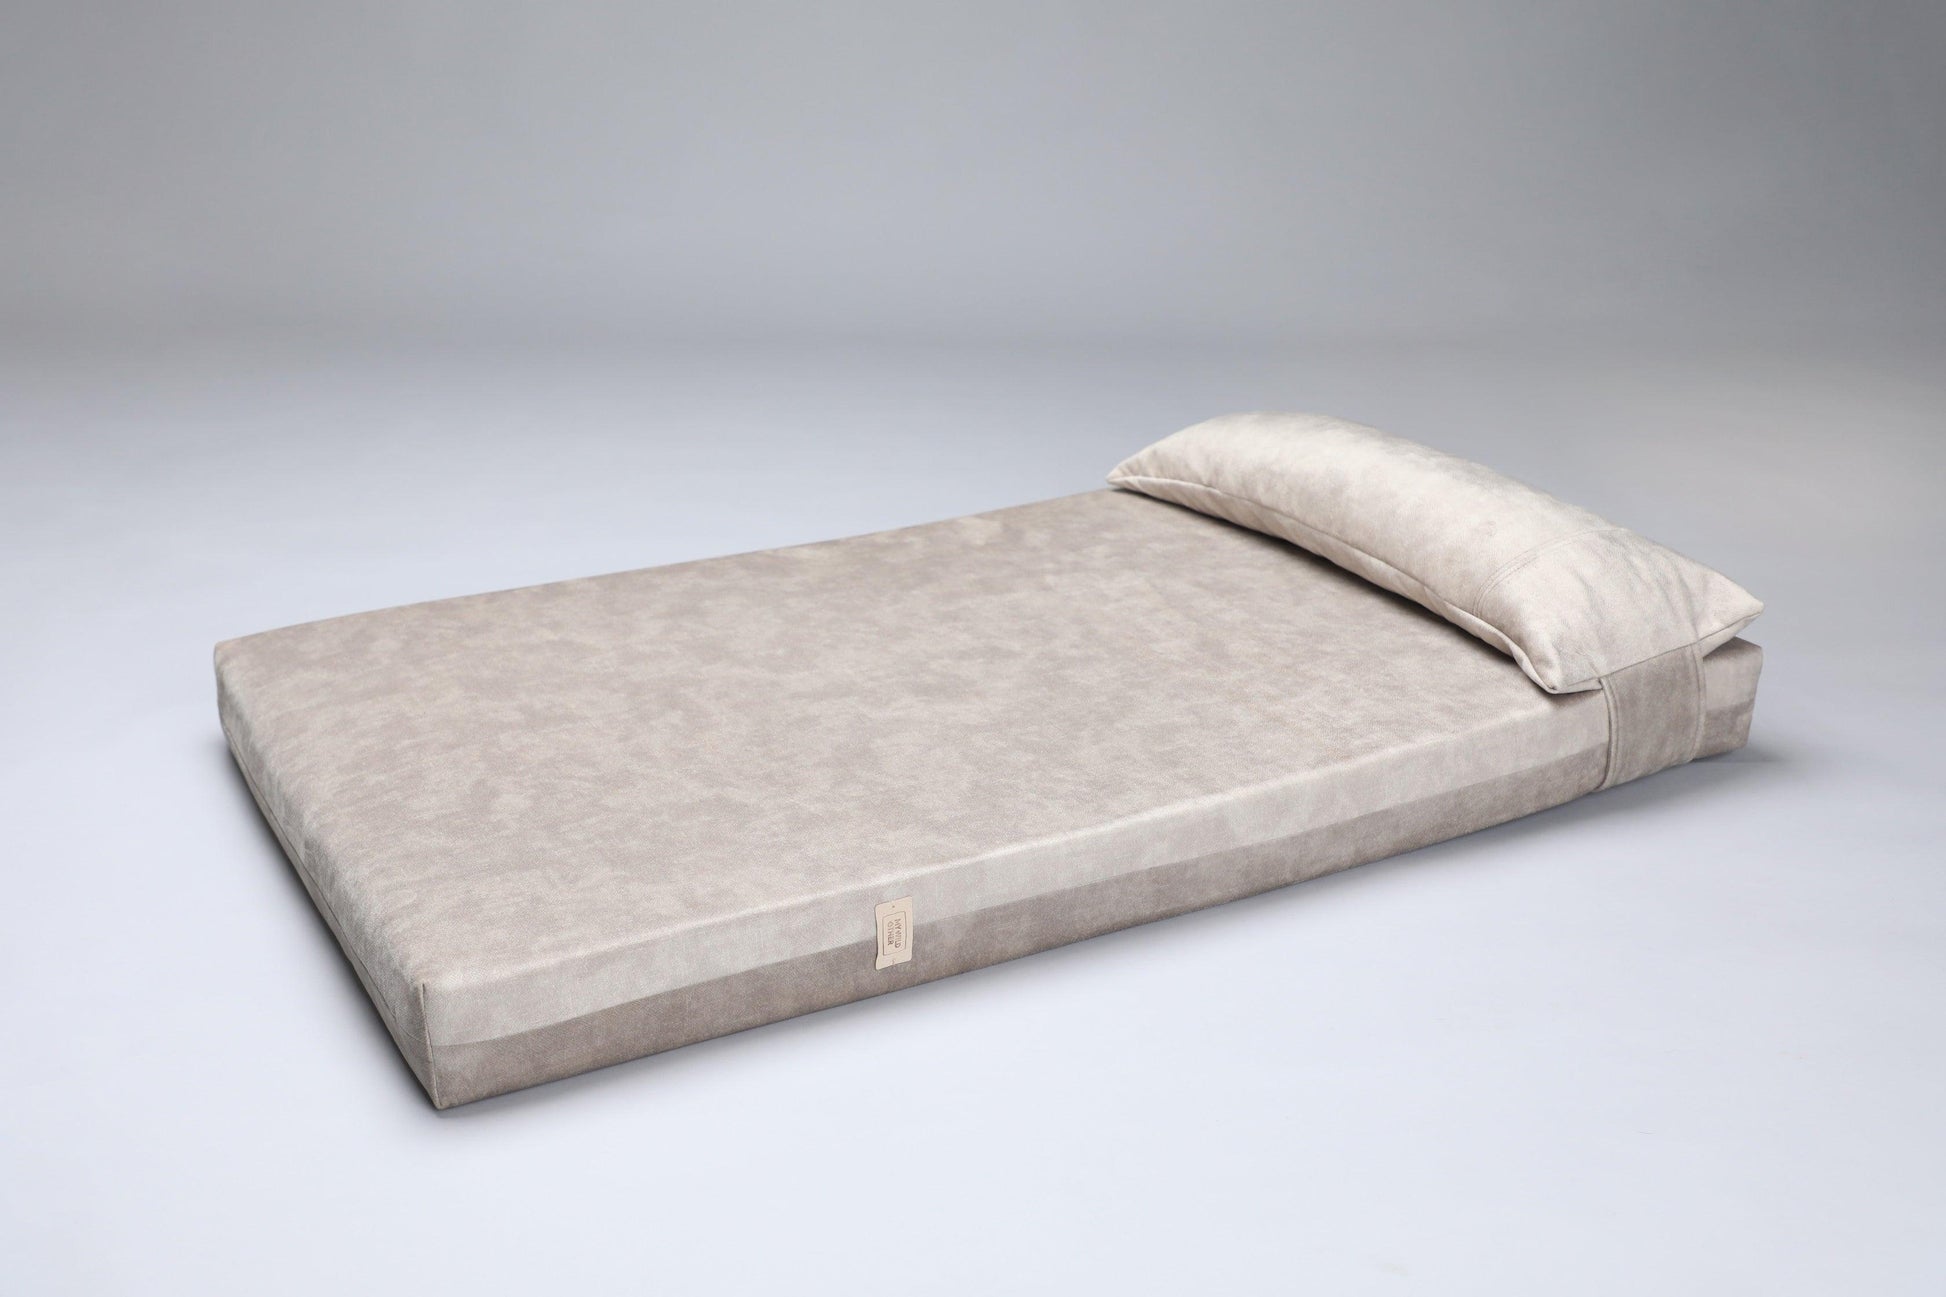 Dog bed for large dogs | Extra comfort & support | 2-sided | BEIGE - premium dog goods handmade in Europe by animalistus